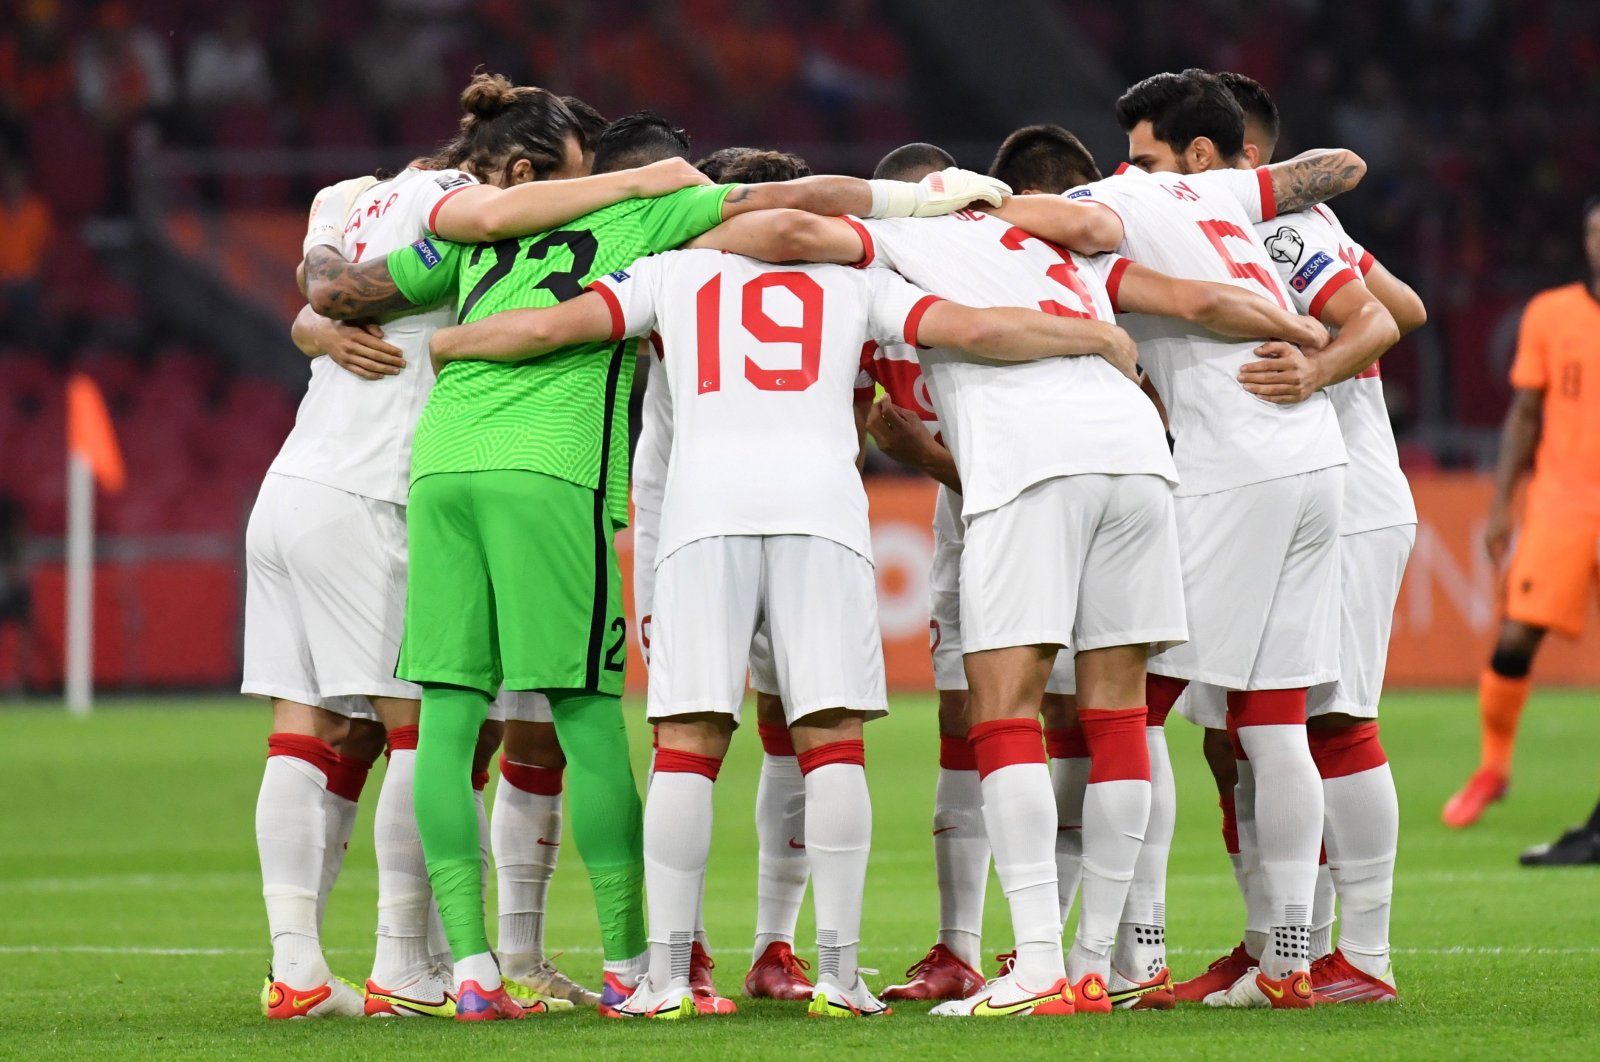 Turkish national team players huddle before the World Cup qualifier against the Netherlands, in Amsterdam, the Netherlands, Sept. 7, 2021. (Reuters Photo)